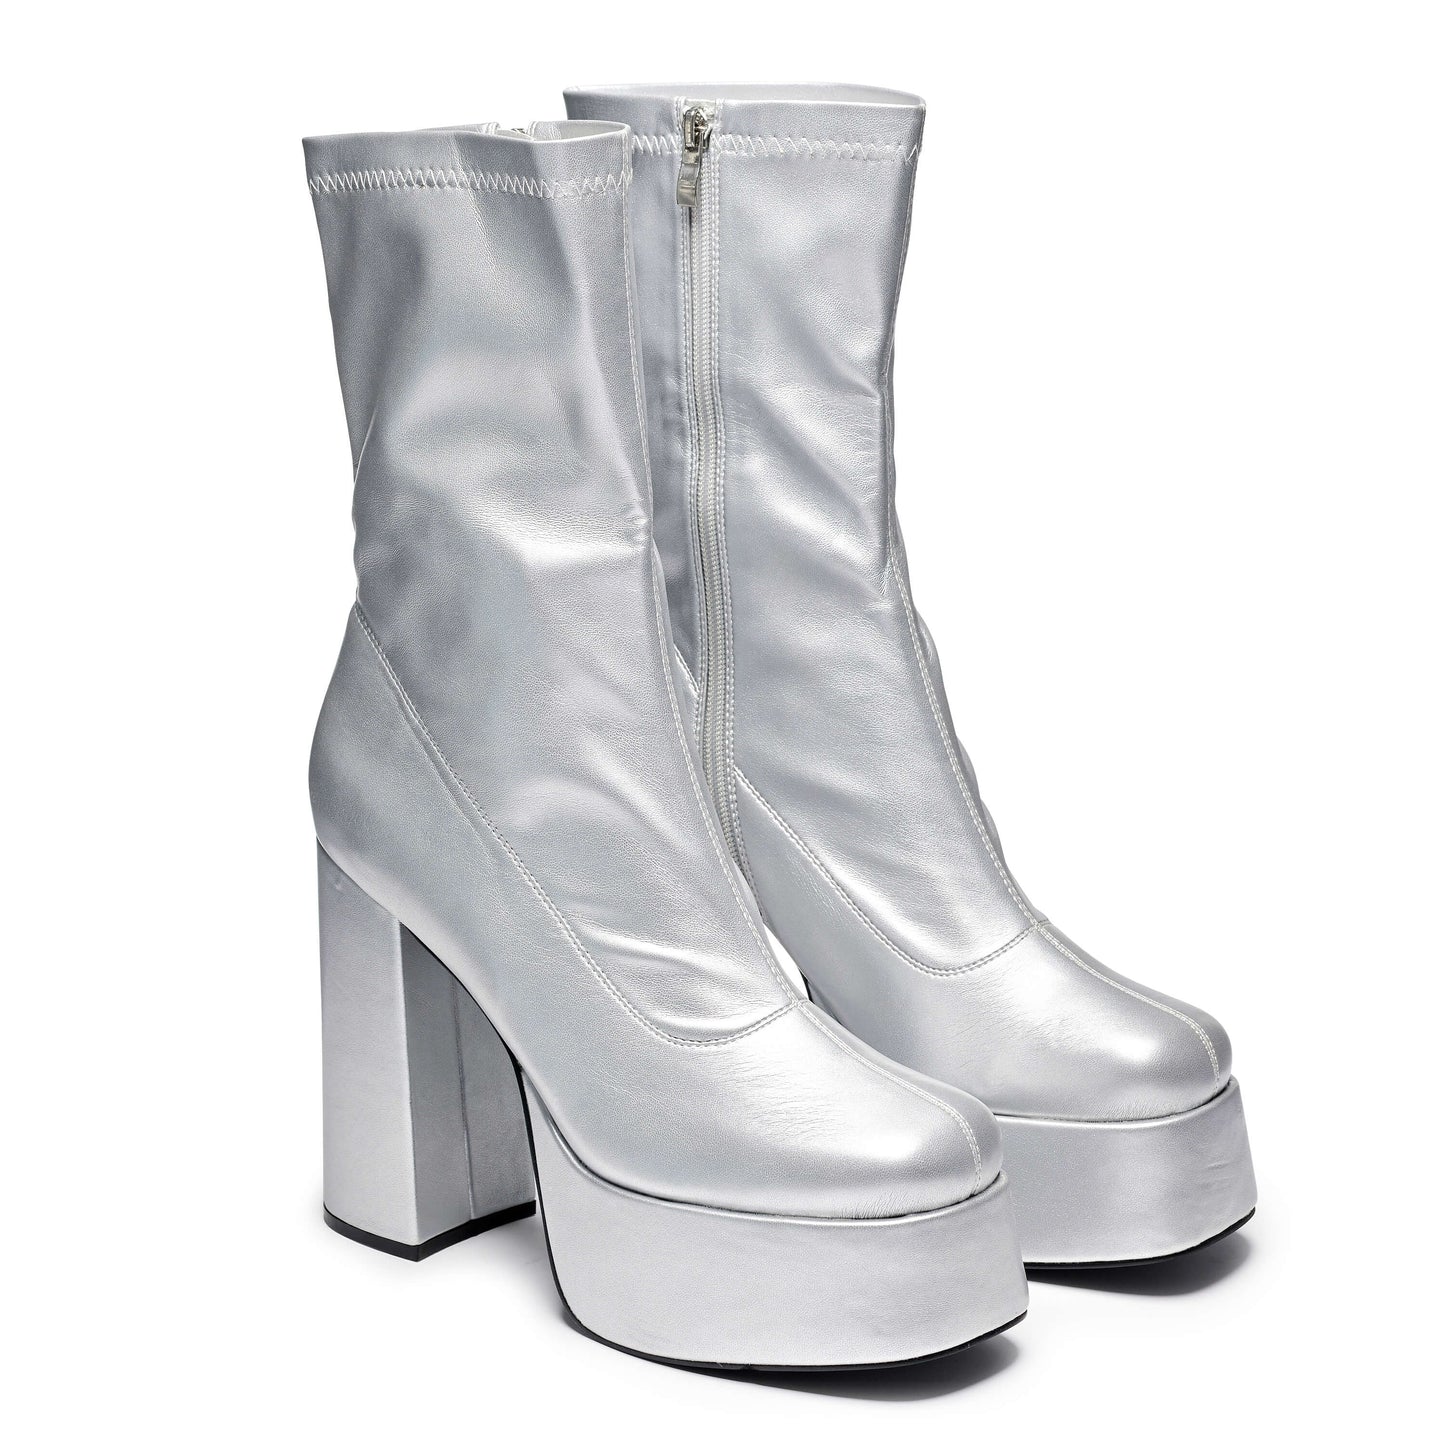 Delano Men's Silver Platform Heeled Boots - Ankle Boots - KOI Footwear - Silver - Three-Quarter View